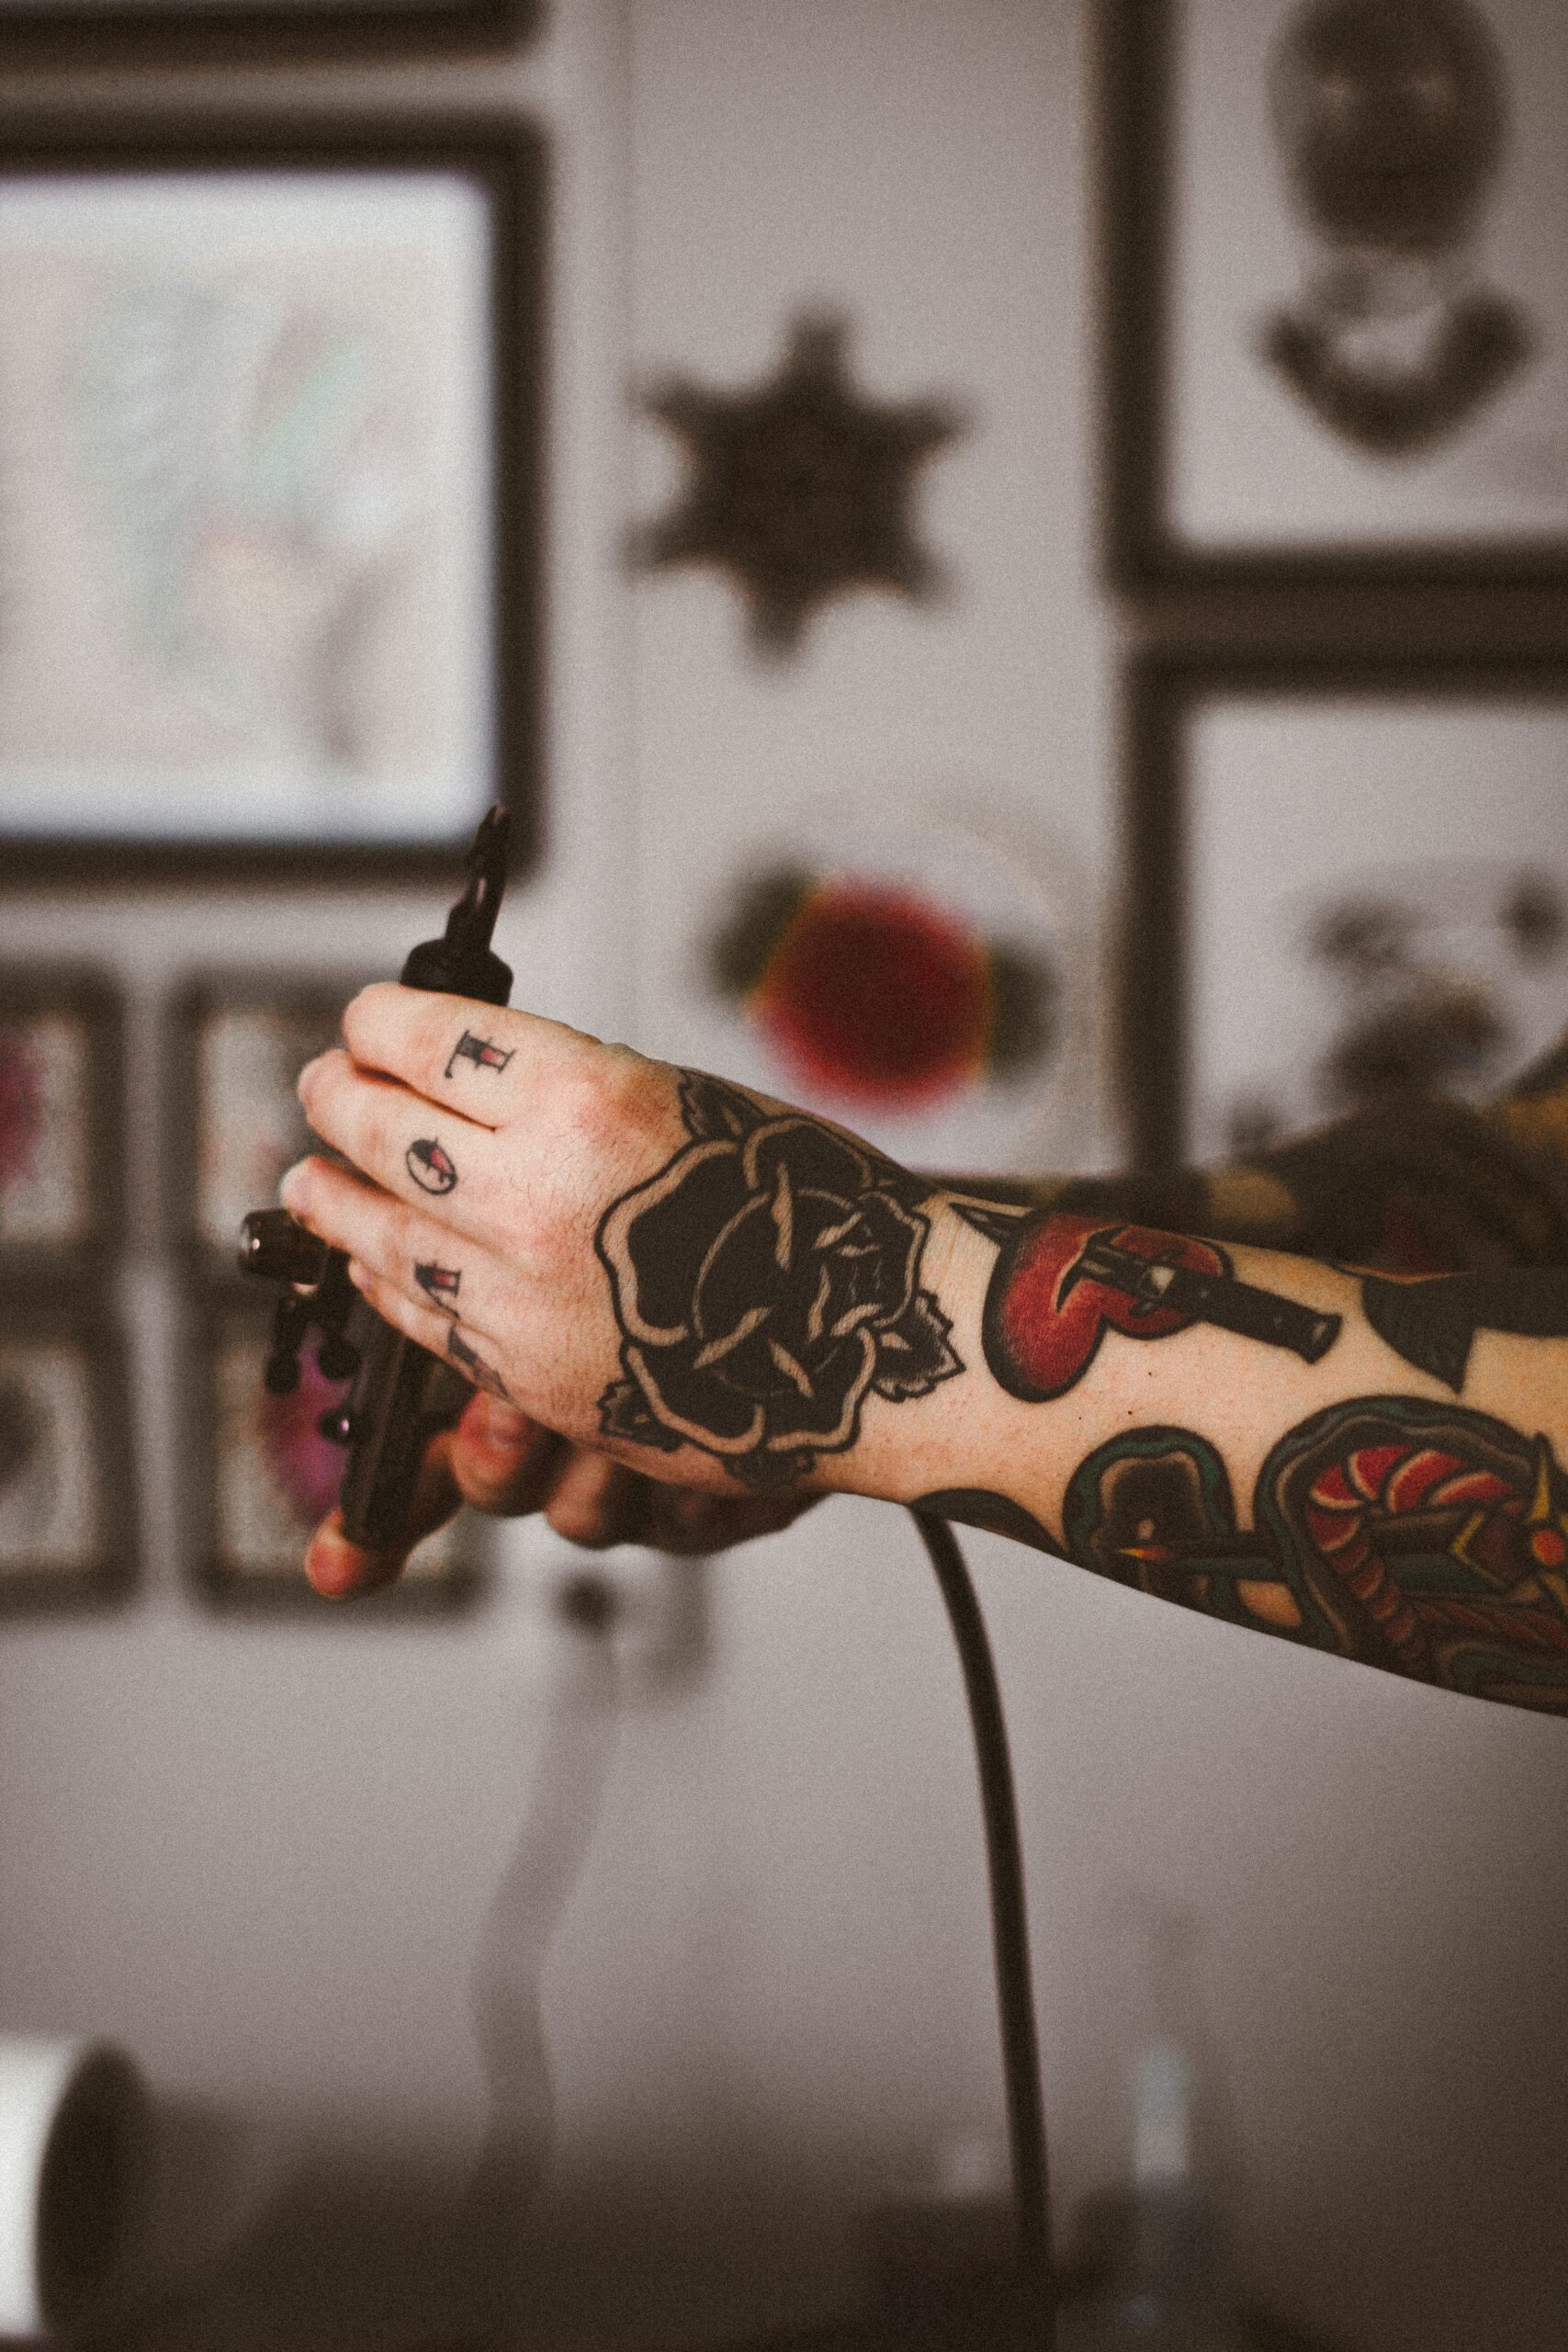 Ink on Skin - 5 Best Practices to Follow in Getting Tattoos